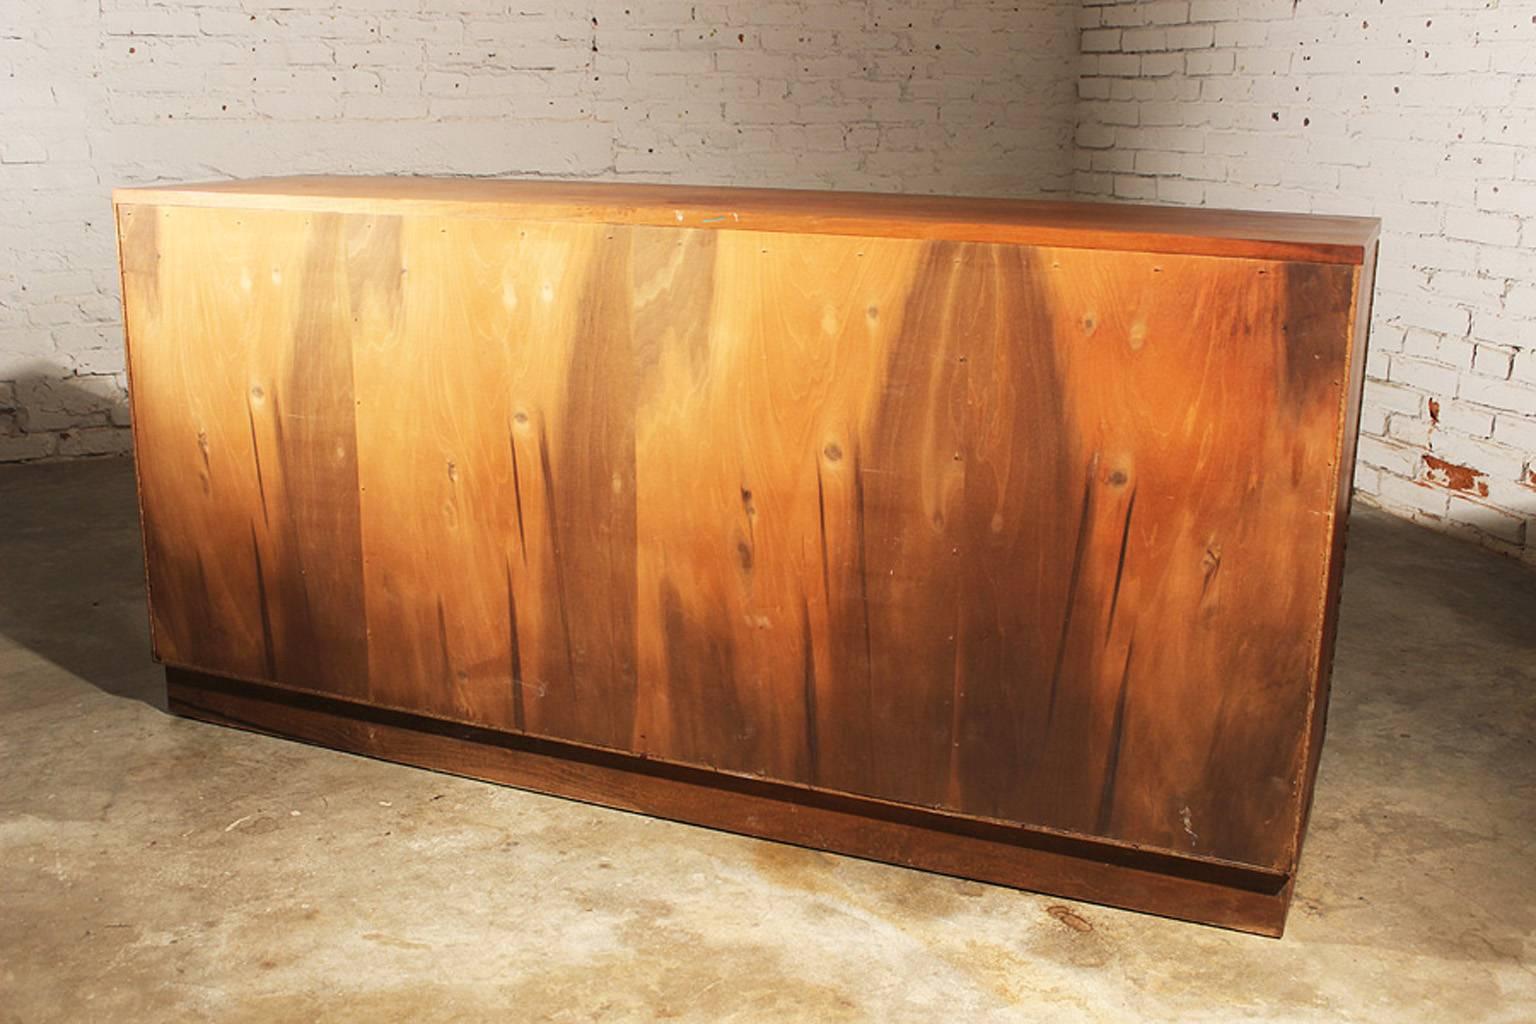 20th Century Honduran Rosewood Bookmatched Cabinet by Jack Cartwright for Founders Furniture